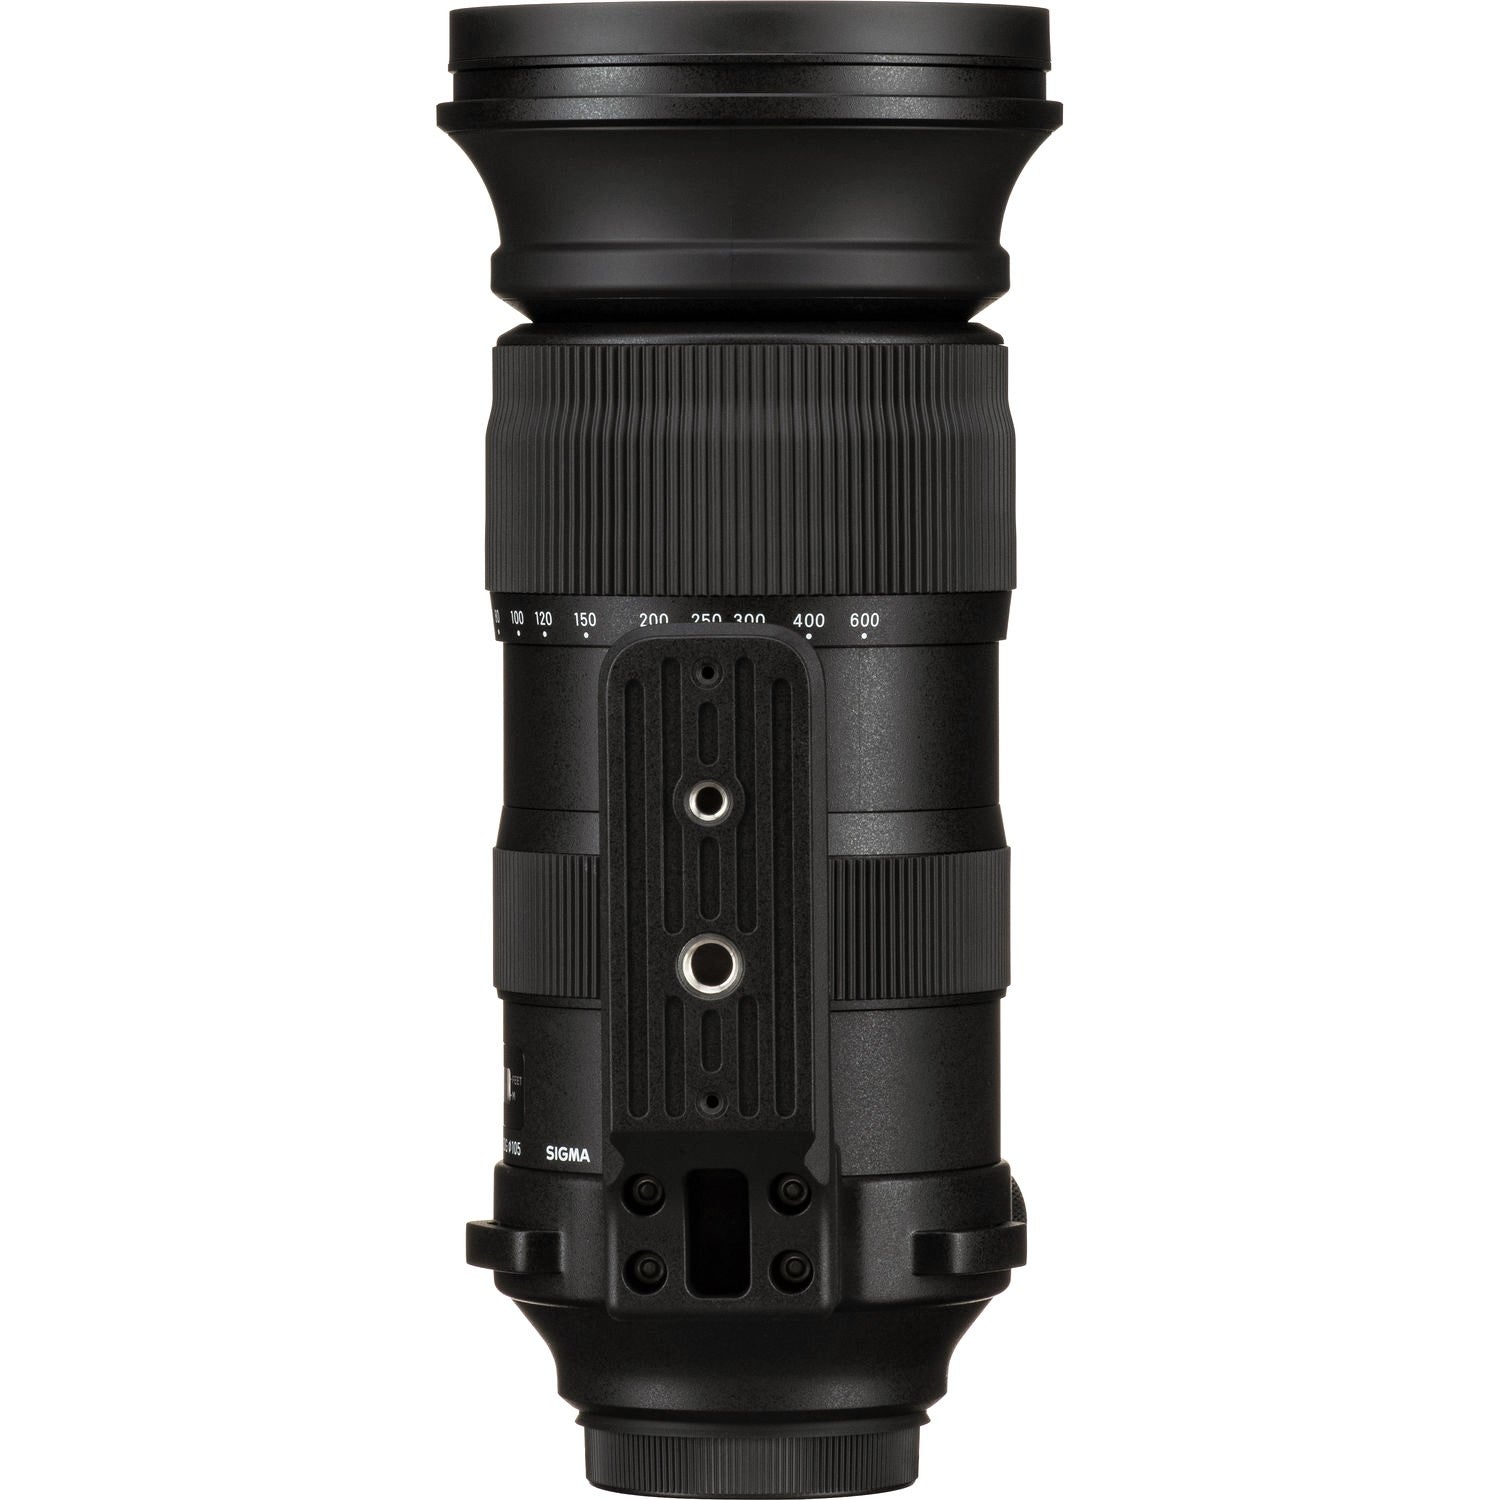 Sigma 60-600mm F4.5-6.3 DG OS HSM Sports Lens for Canon EF with Attached Tripod Mount on the Front